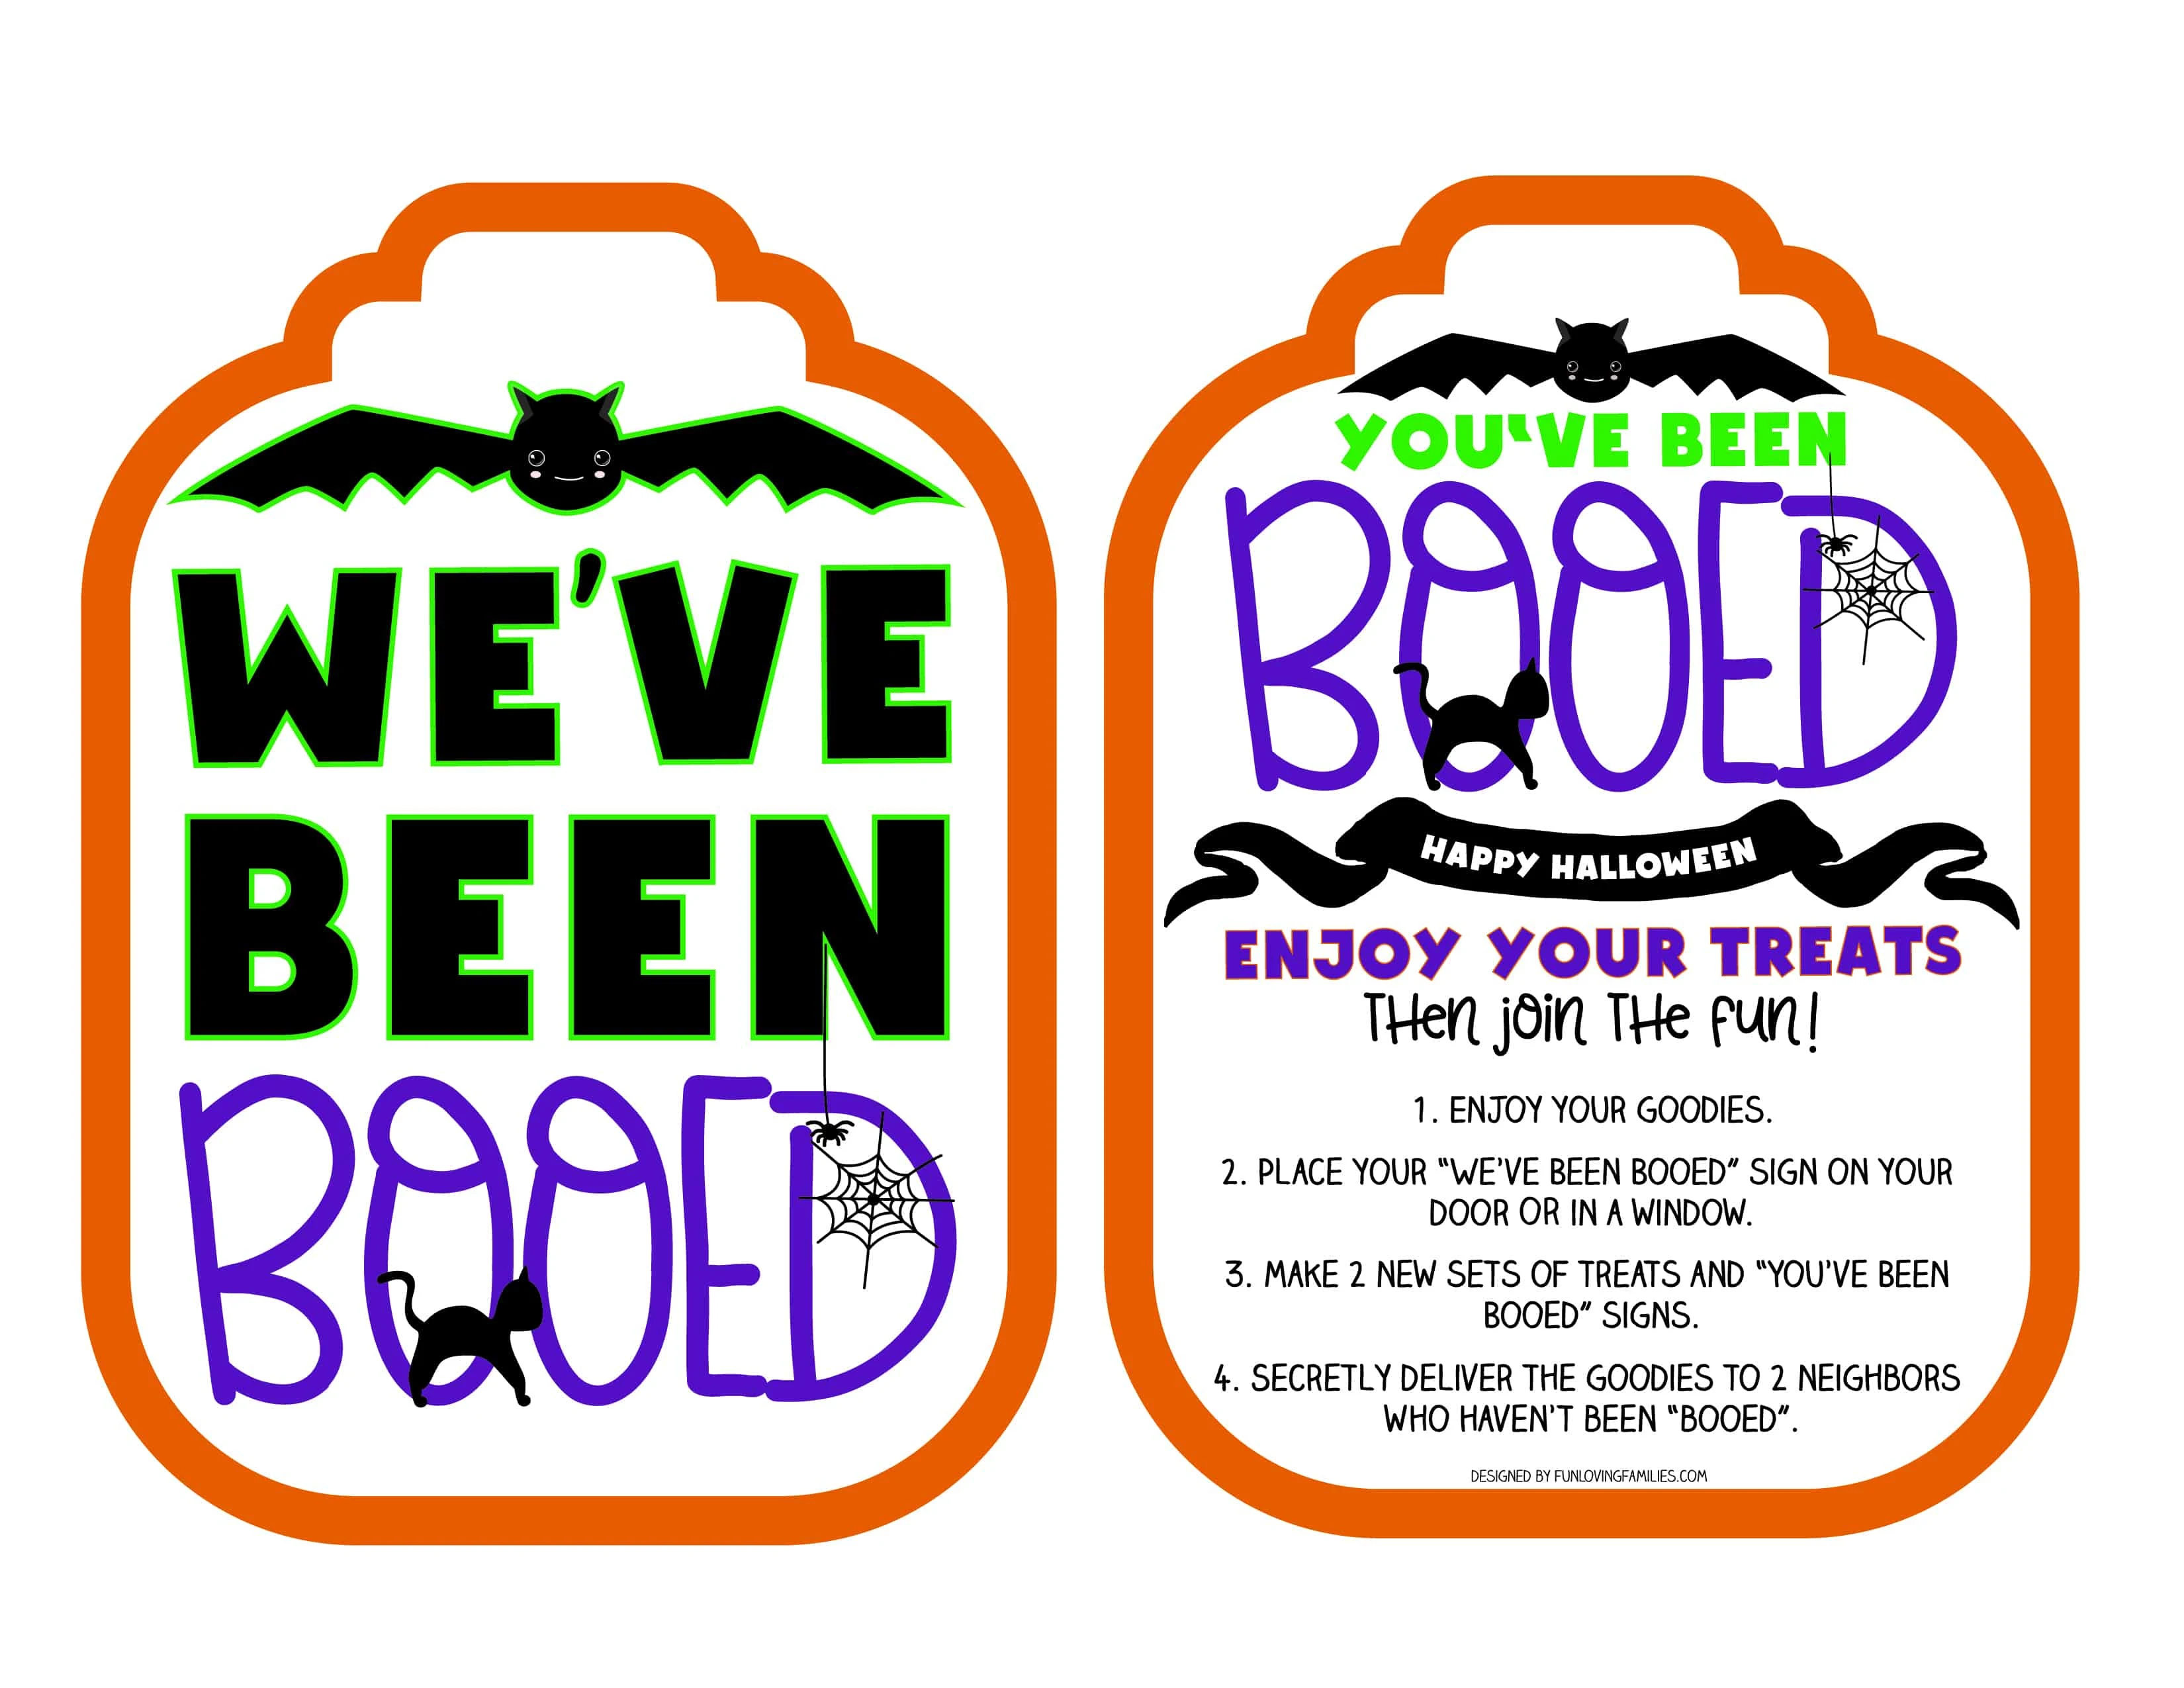 "Boo" your neighbors with some fun Halloween goodies. Grab these free printable You've Been Booed signs and some candy, and spread Halloween cheer!